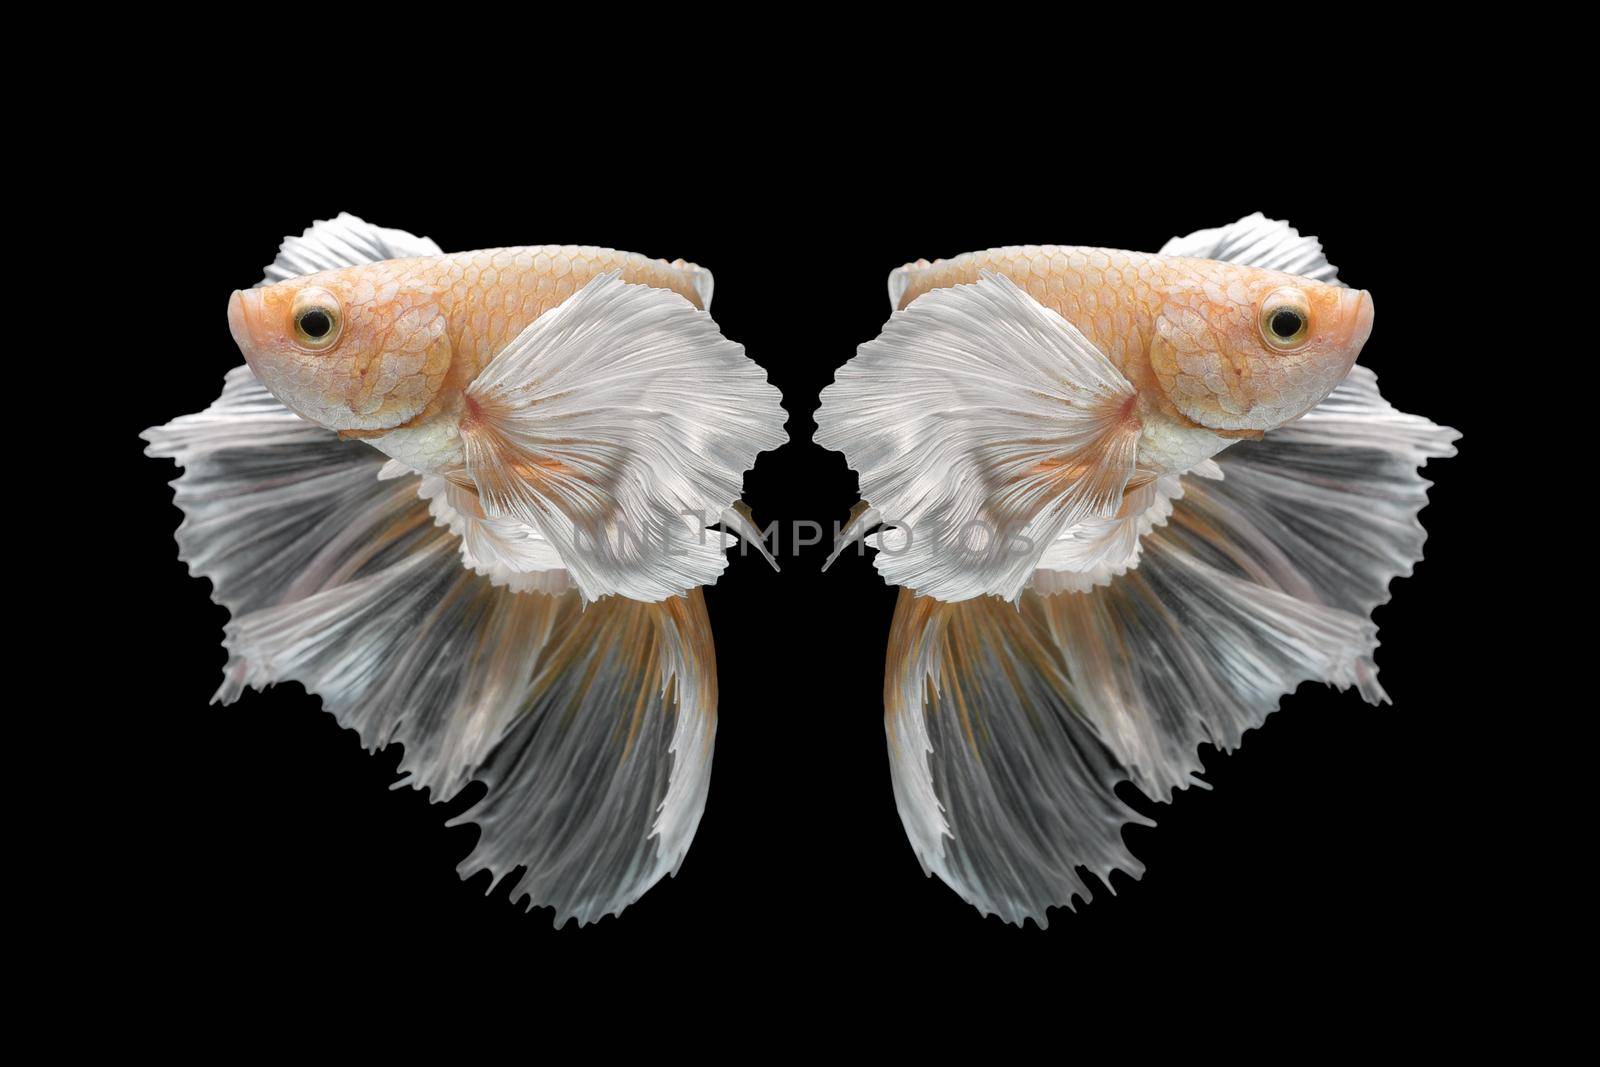 Abstract close up art movement of Betta fish,Siamese fighting fish isolated on black background.Fine art design concept. by Nuamfolio